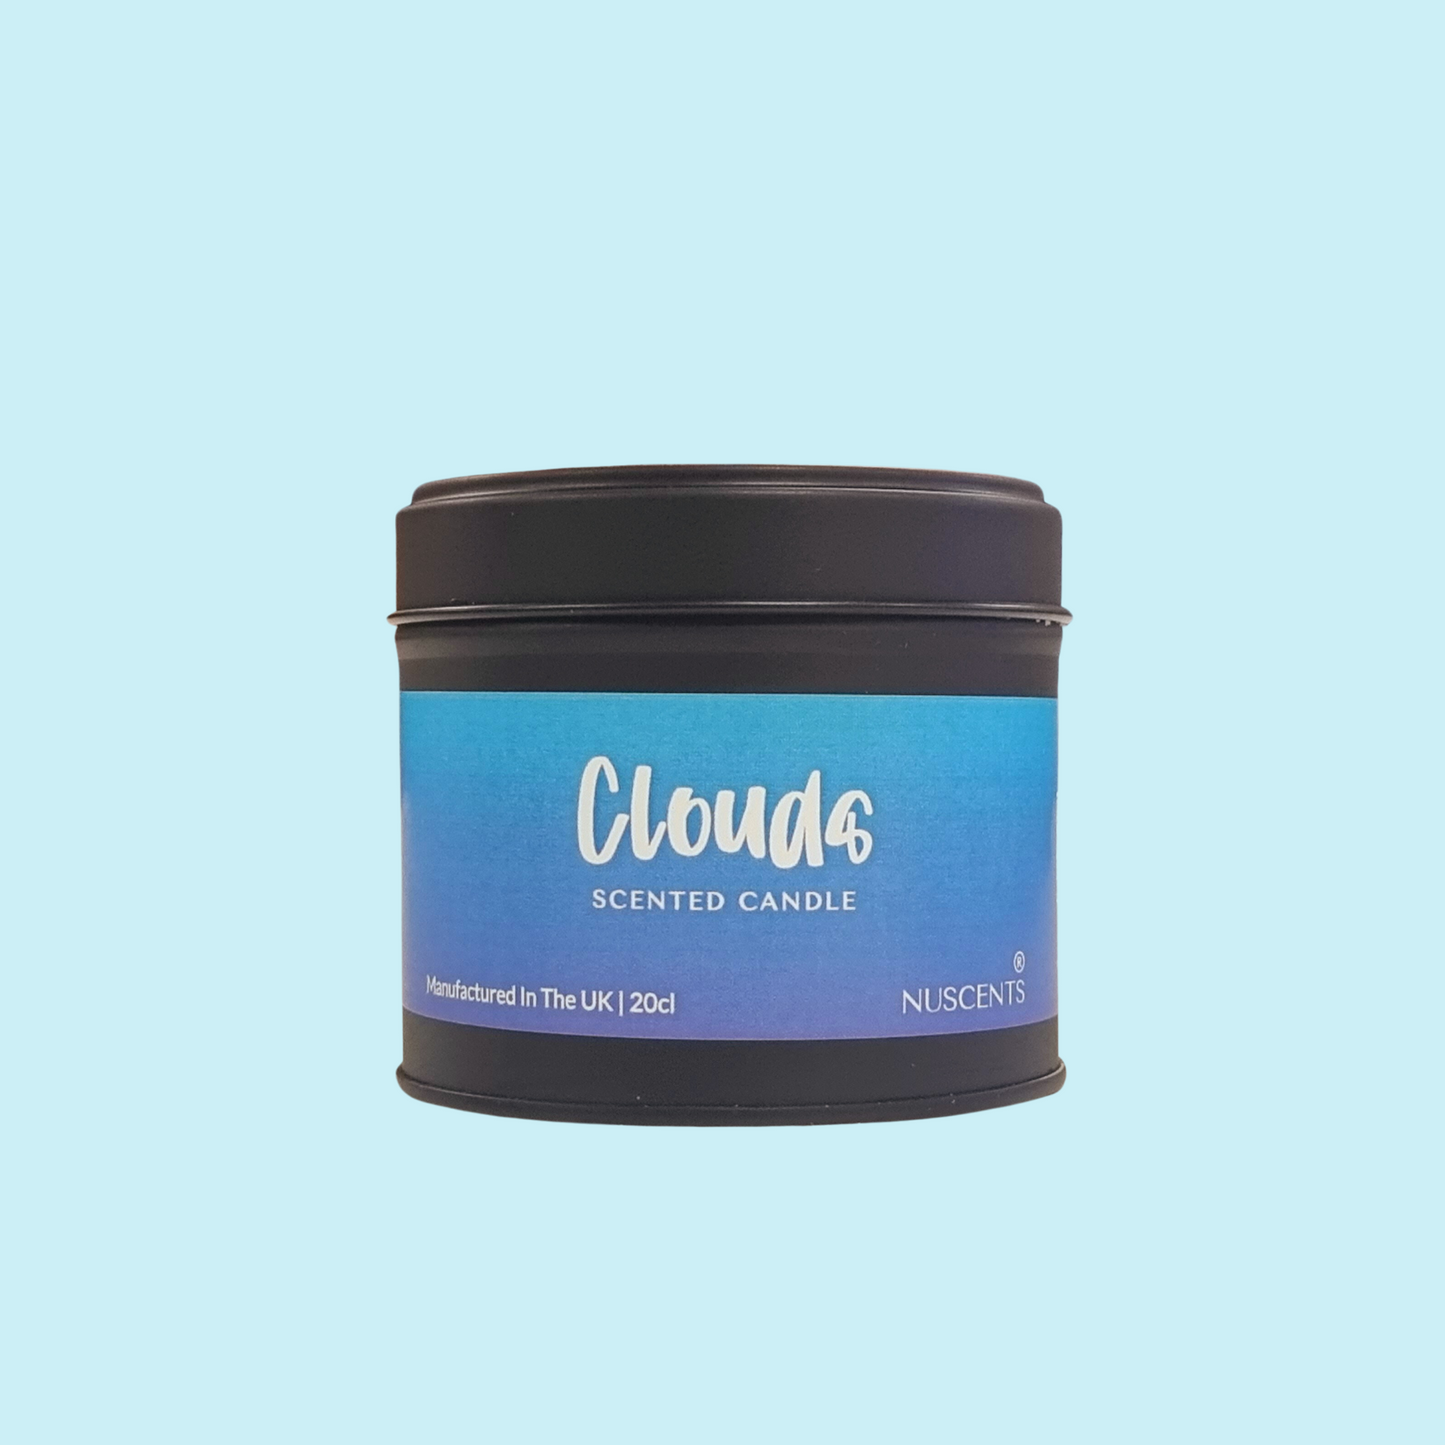 Clouds Scented Candle